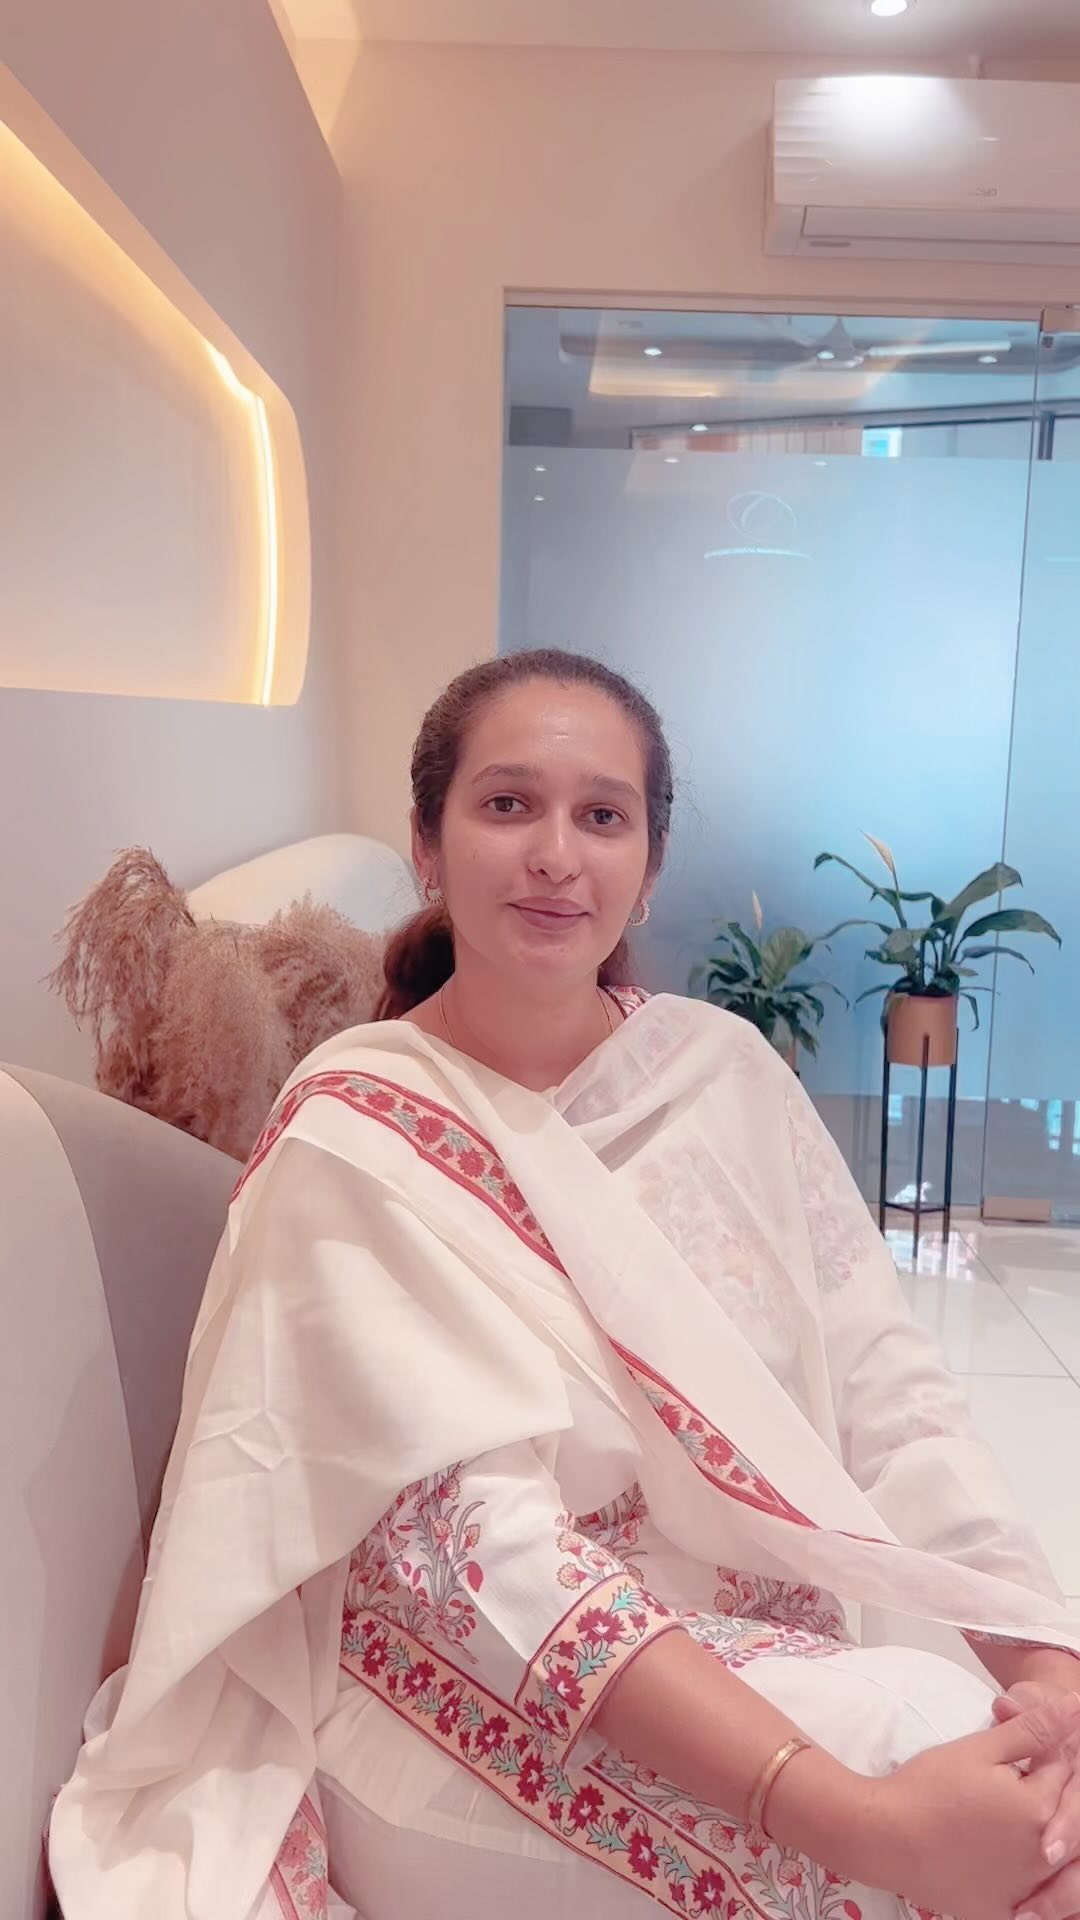 Dr. Karishma Singh, Founder & Medical Director, The Skin Firm - Meet the Best Dermatologist in Pune, Dr. Karishma Singh, a renowned medical professional with a passion for skincare and cosmetic procedures, dedicated to providing top-notch services at The Skin Firm.